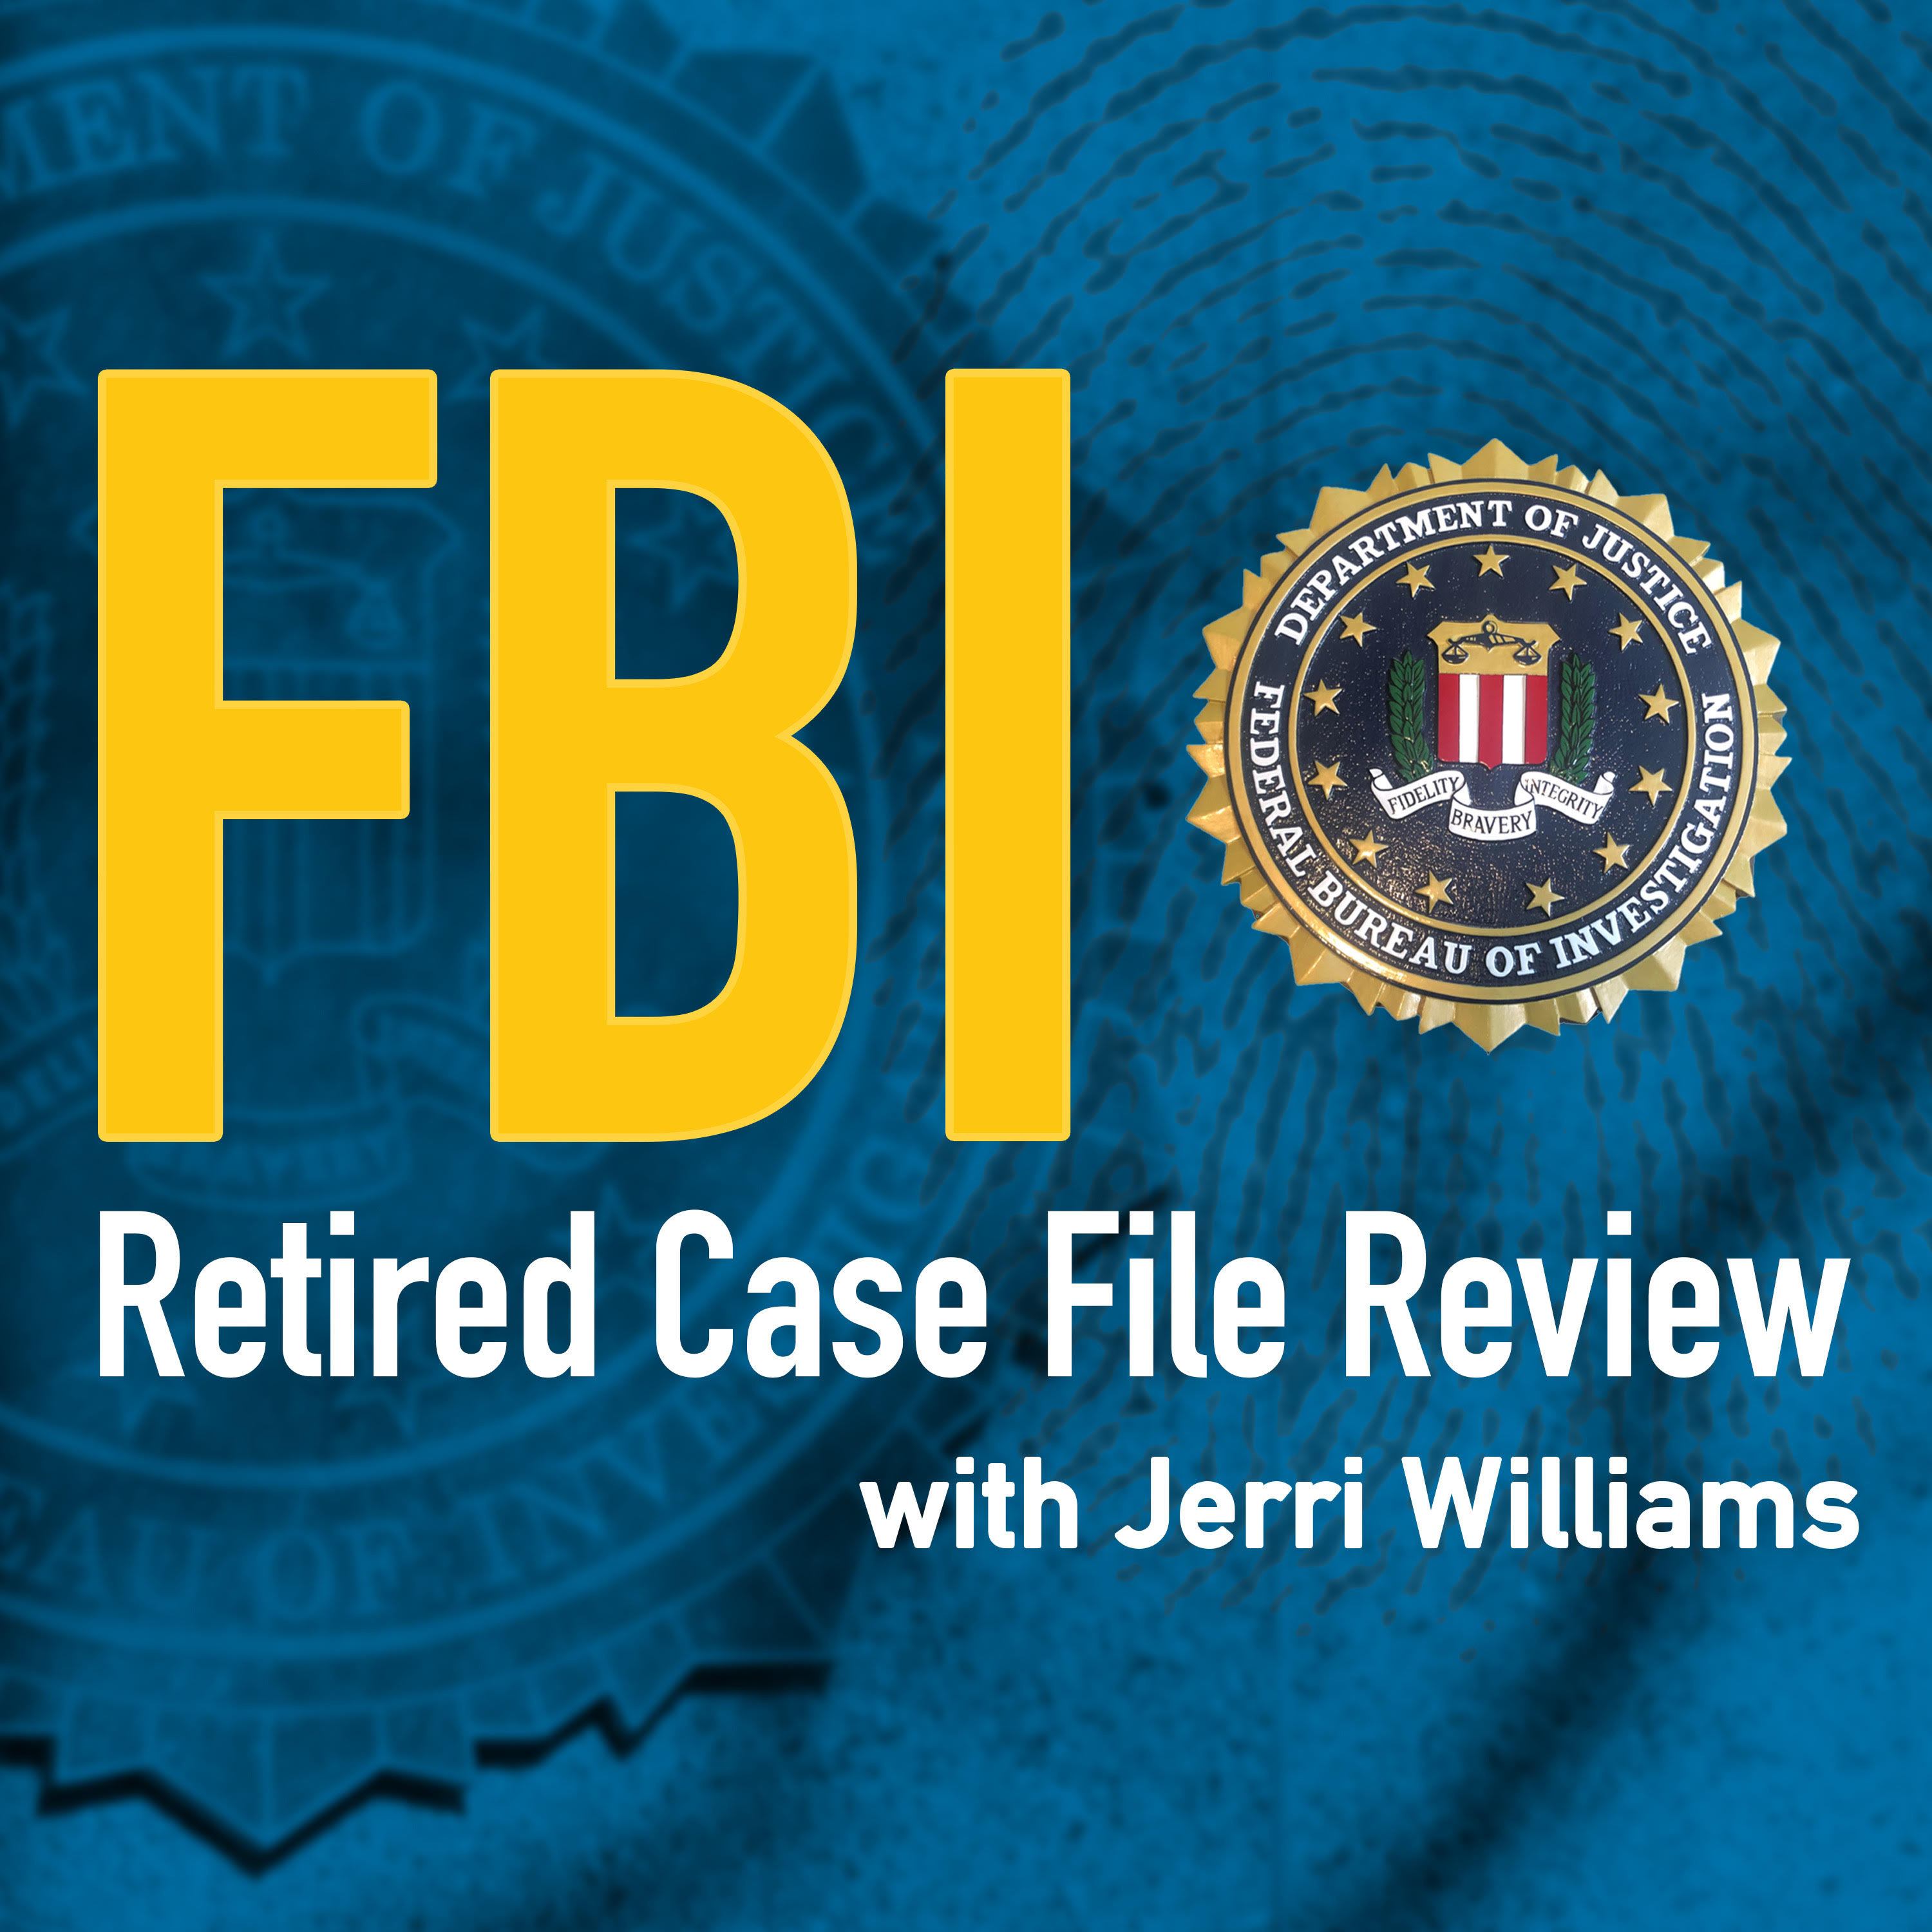 FBI Retired Case File Review with Jerri Williams